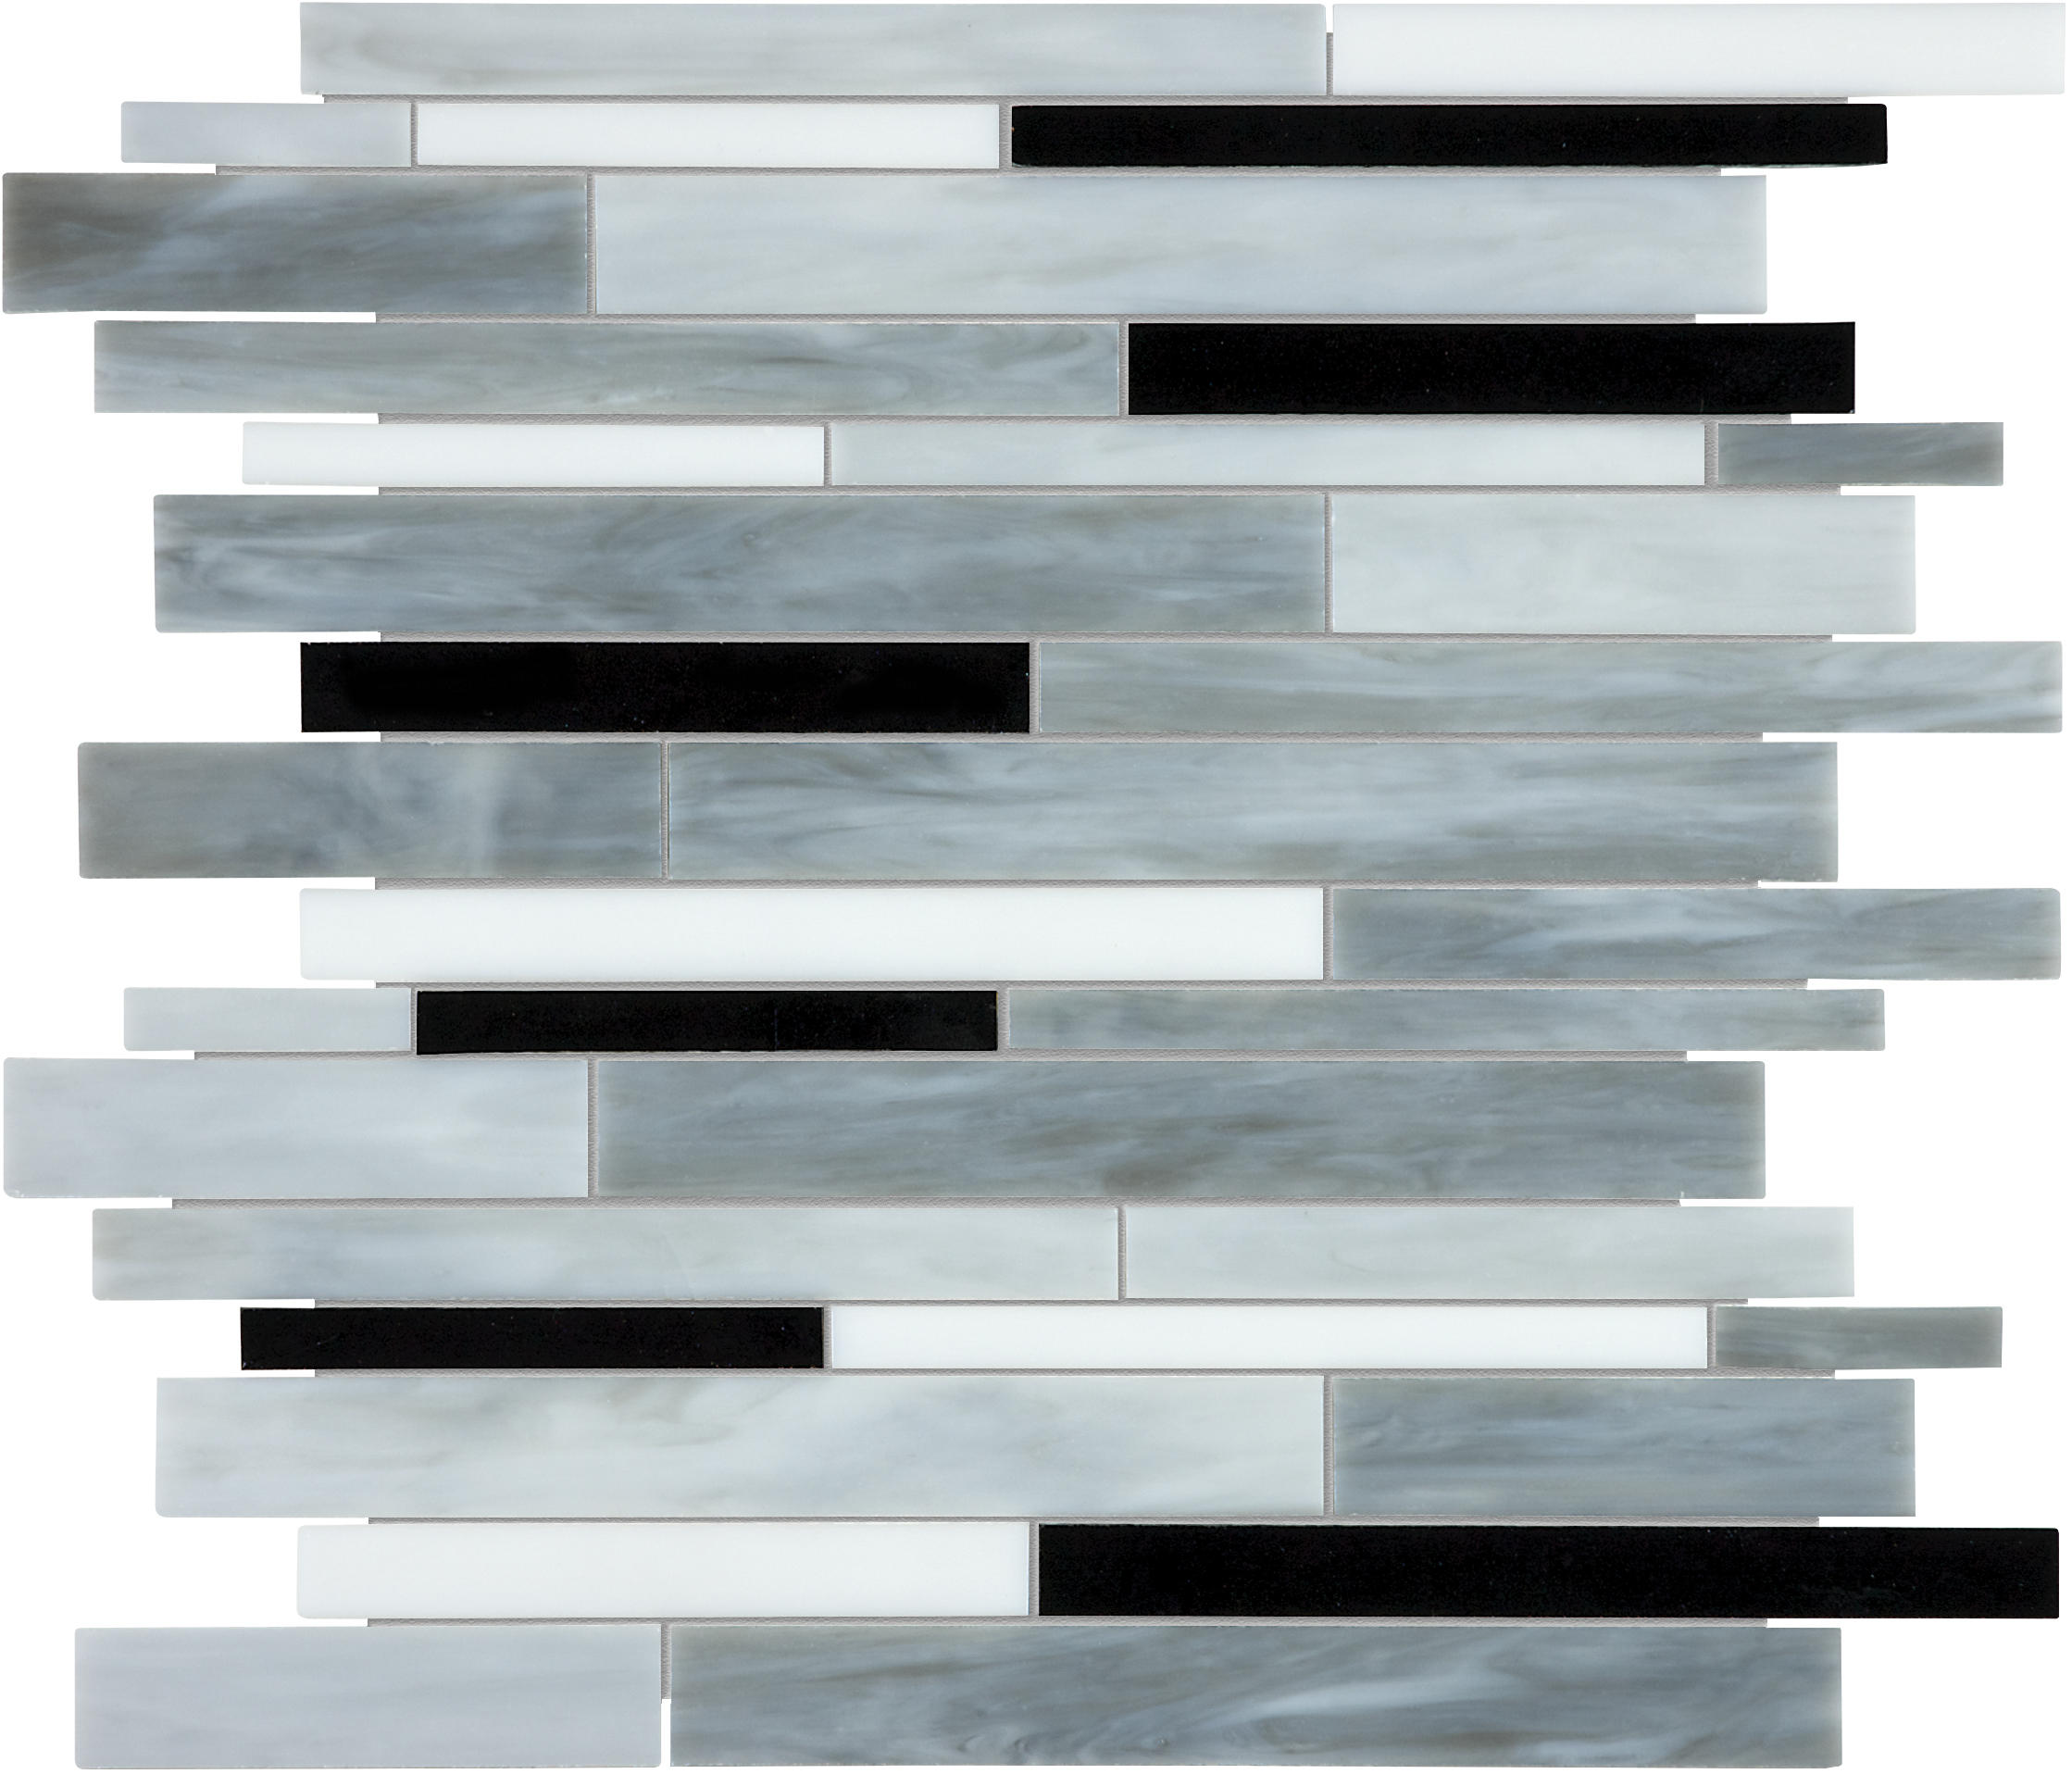 random strip pattern fused glass mosaic from baroque anatolia collection distributed by surface group international glossy finish rounded edge mesh shape